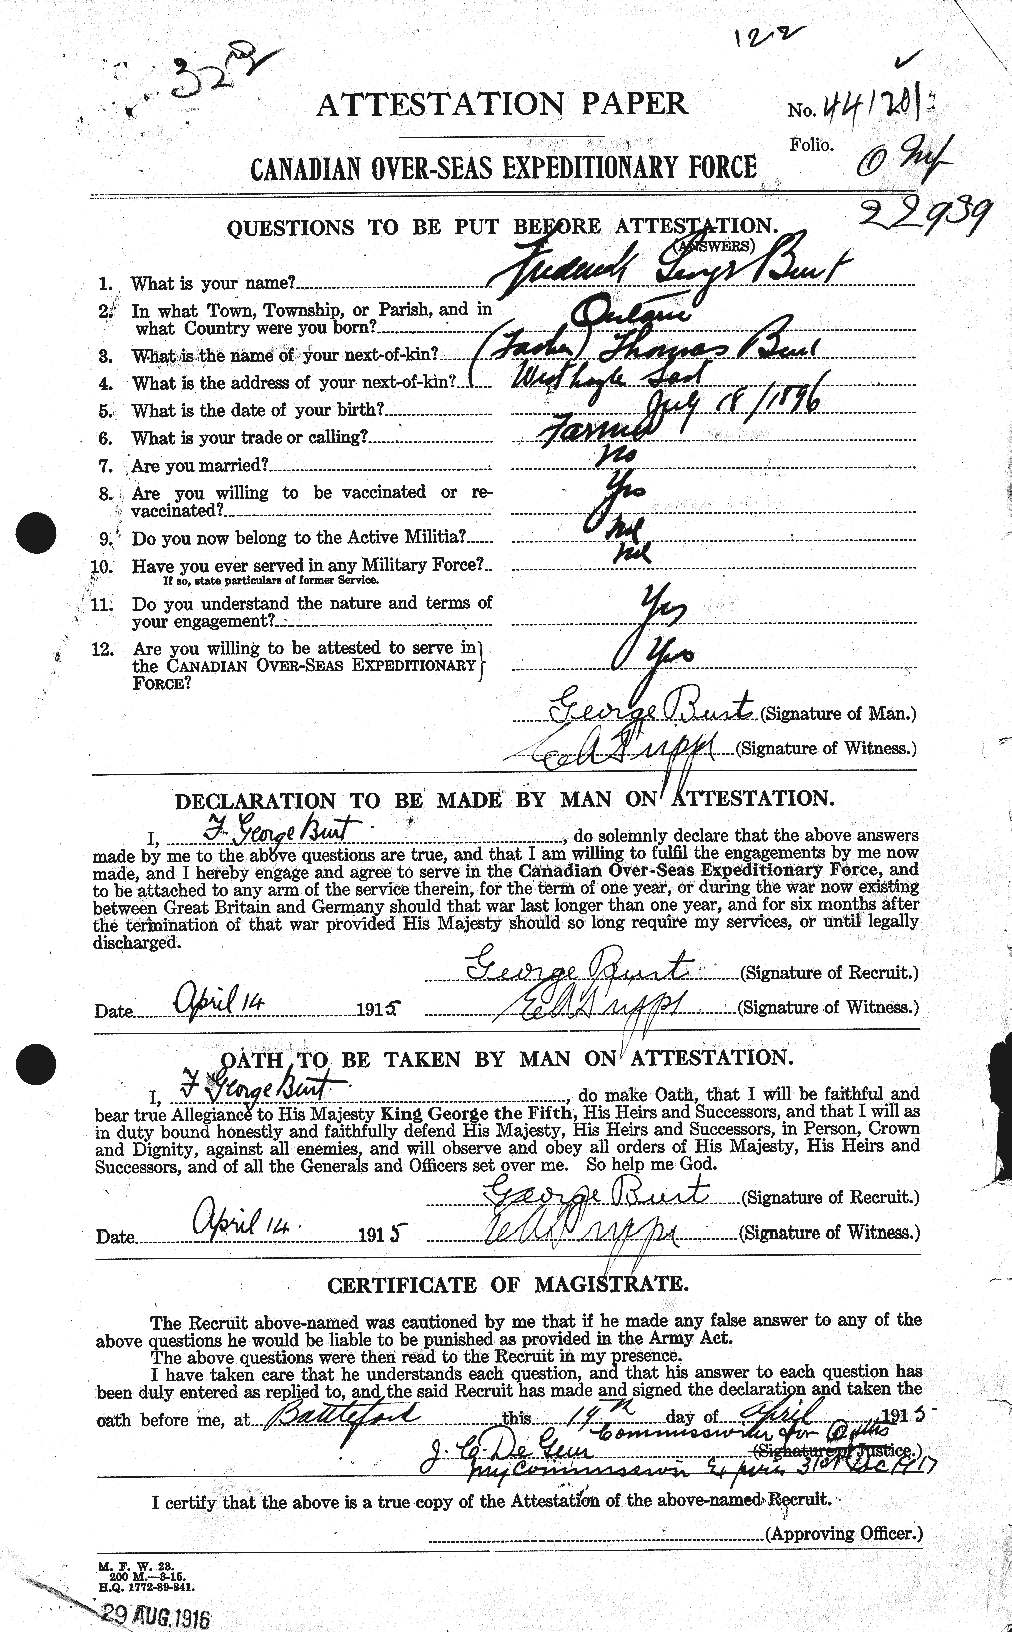 Personnel Records of the First World War - CEF 275007a